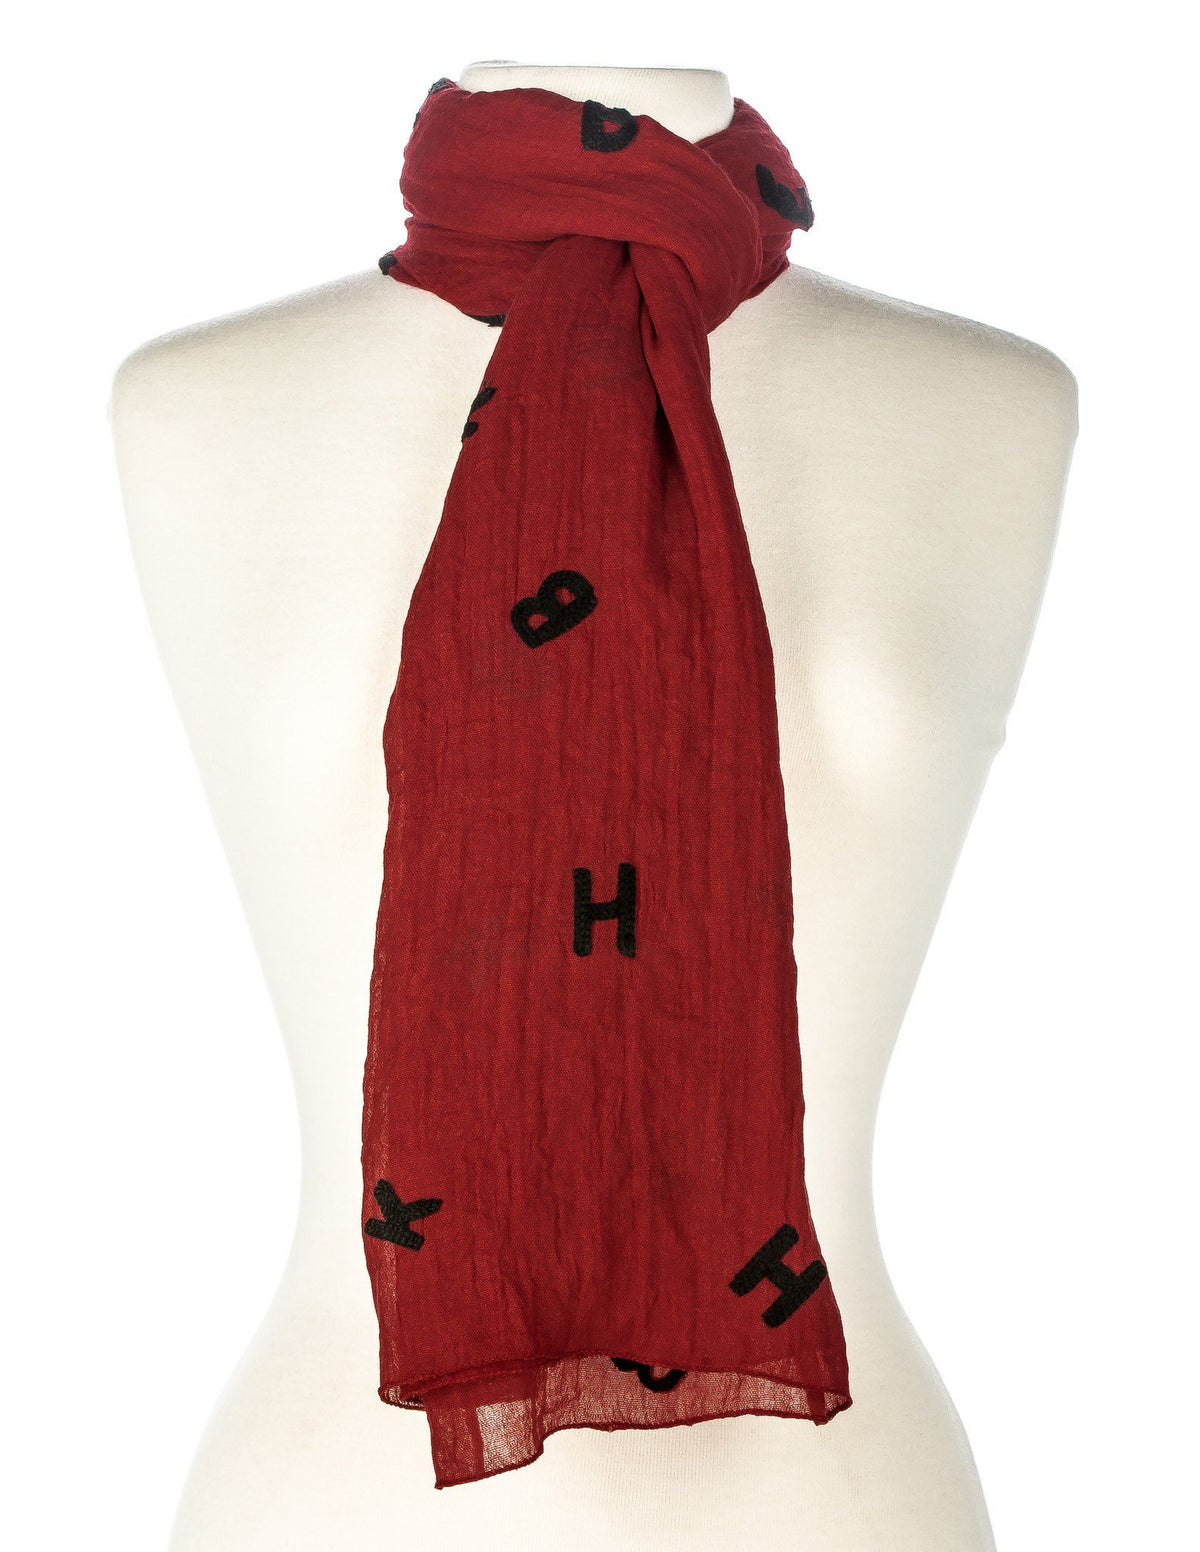 Embroidered Alphabets Spring Scarf - Red